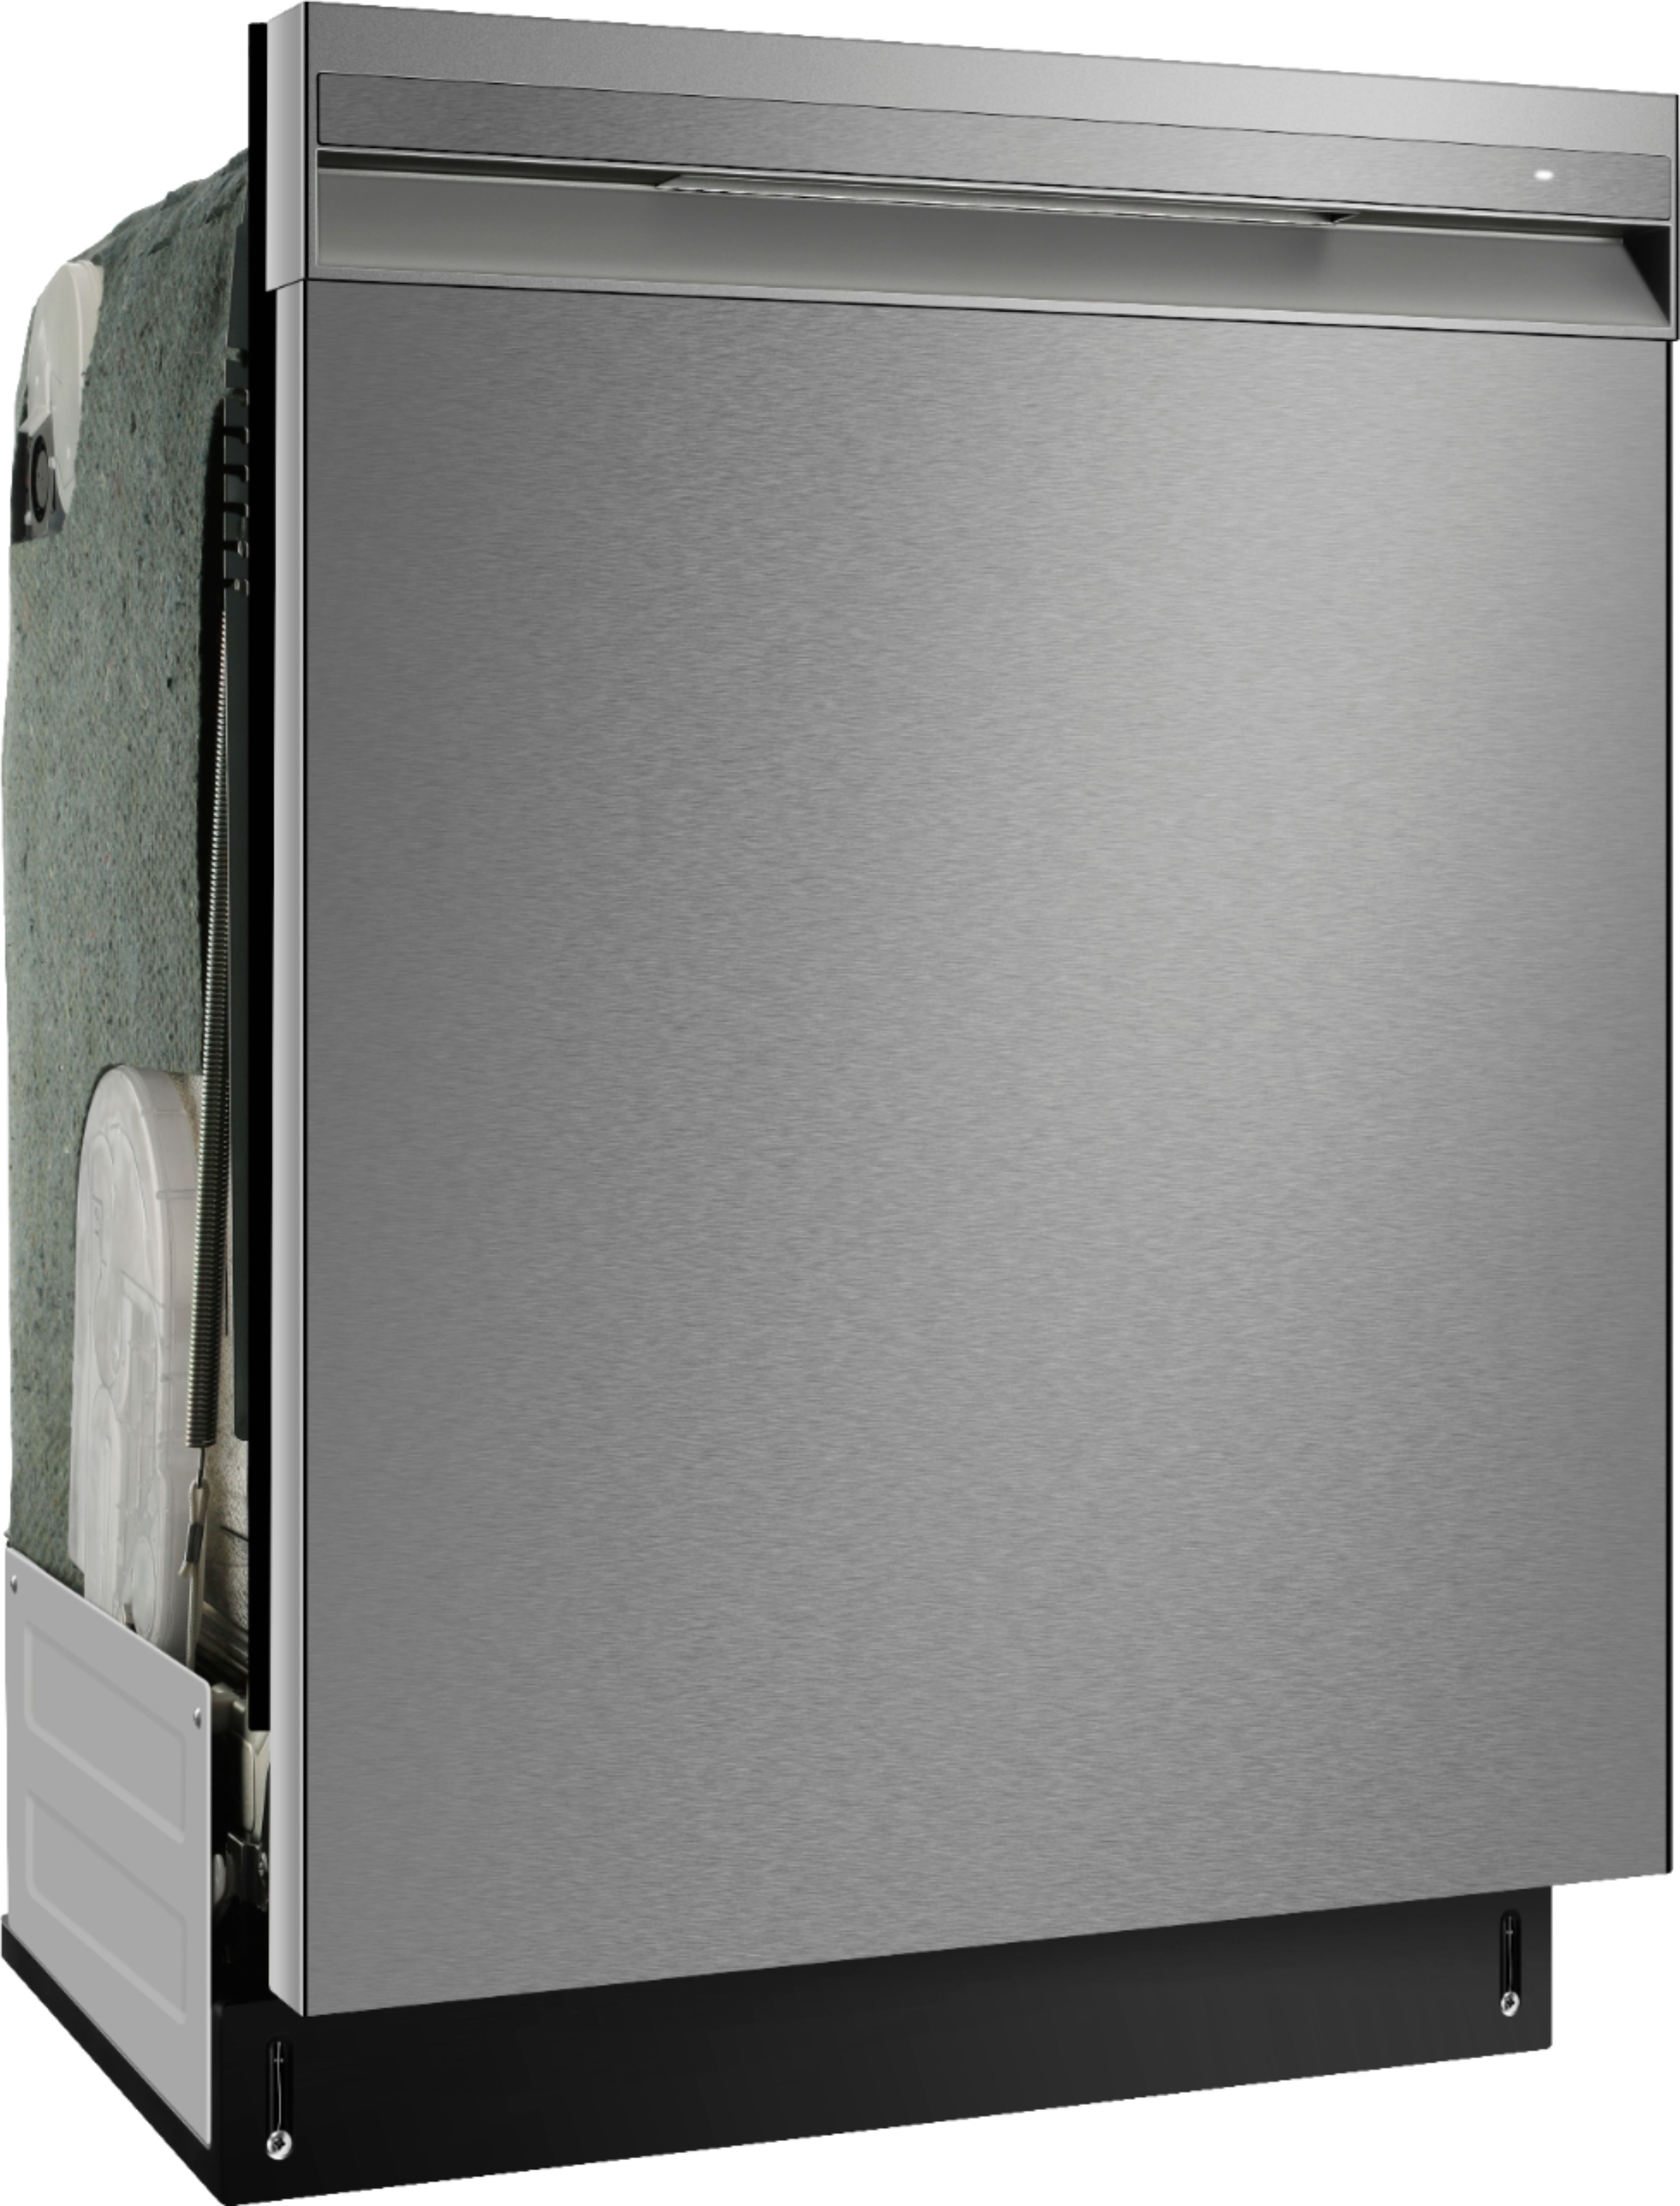 Angle View: Insignia™ - Top Control Built-In Dishwasher with Recessed Handle - Stainless steel